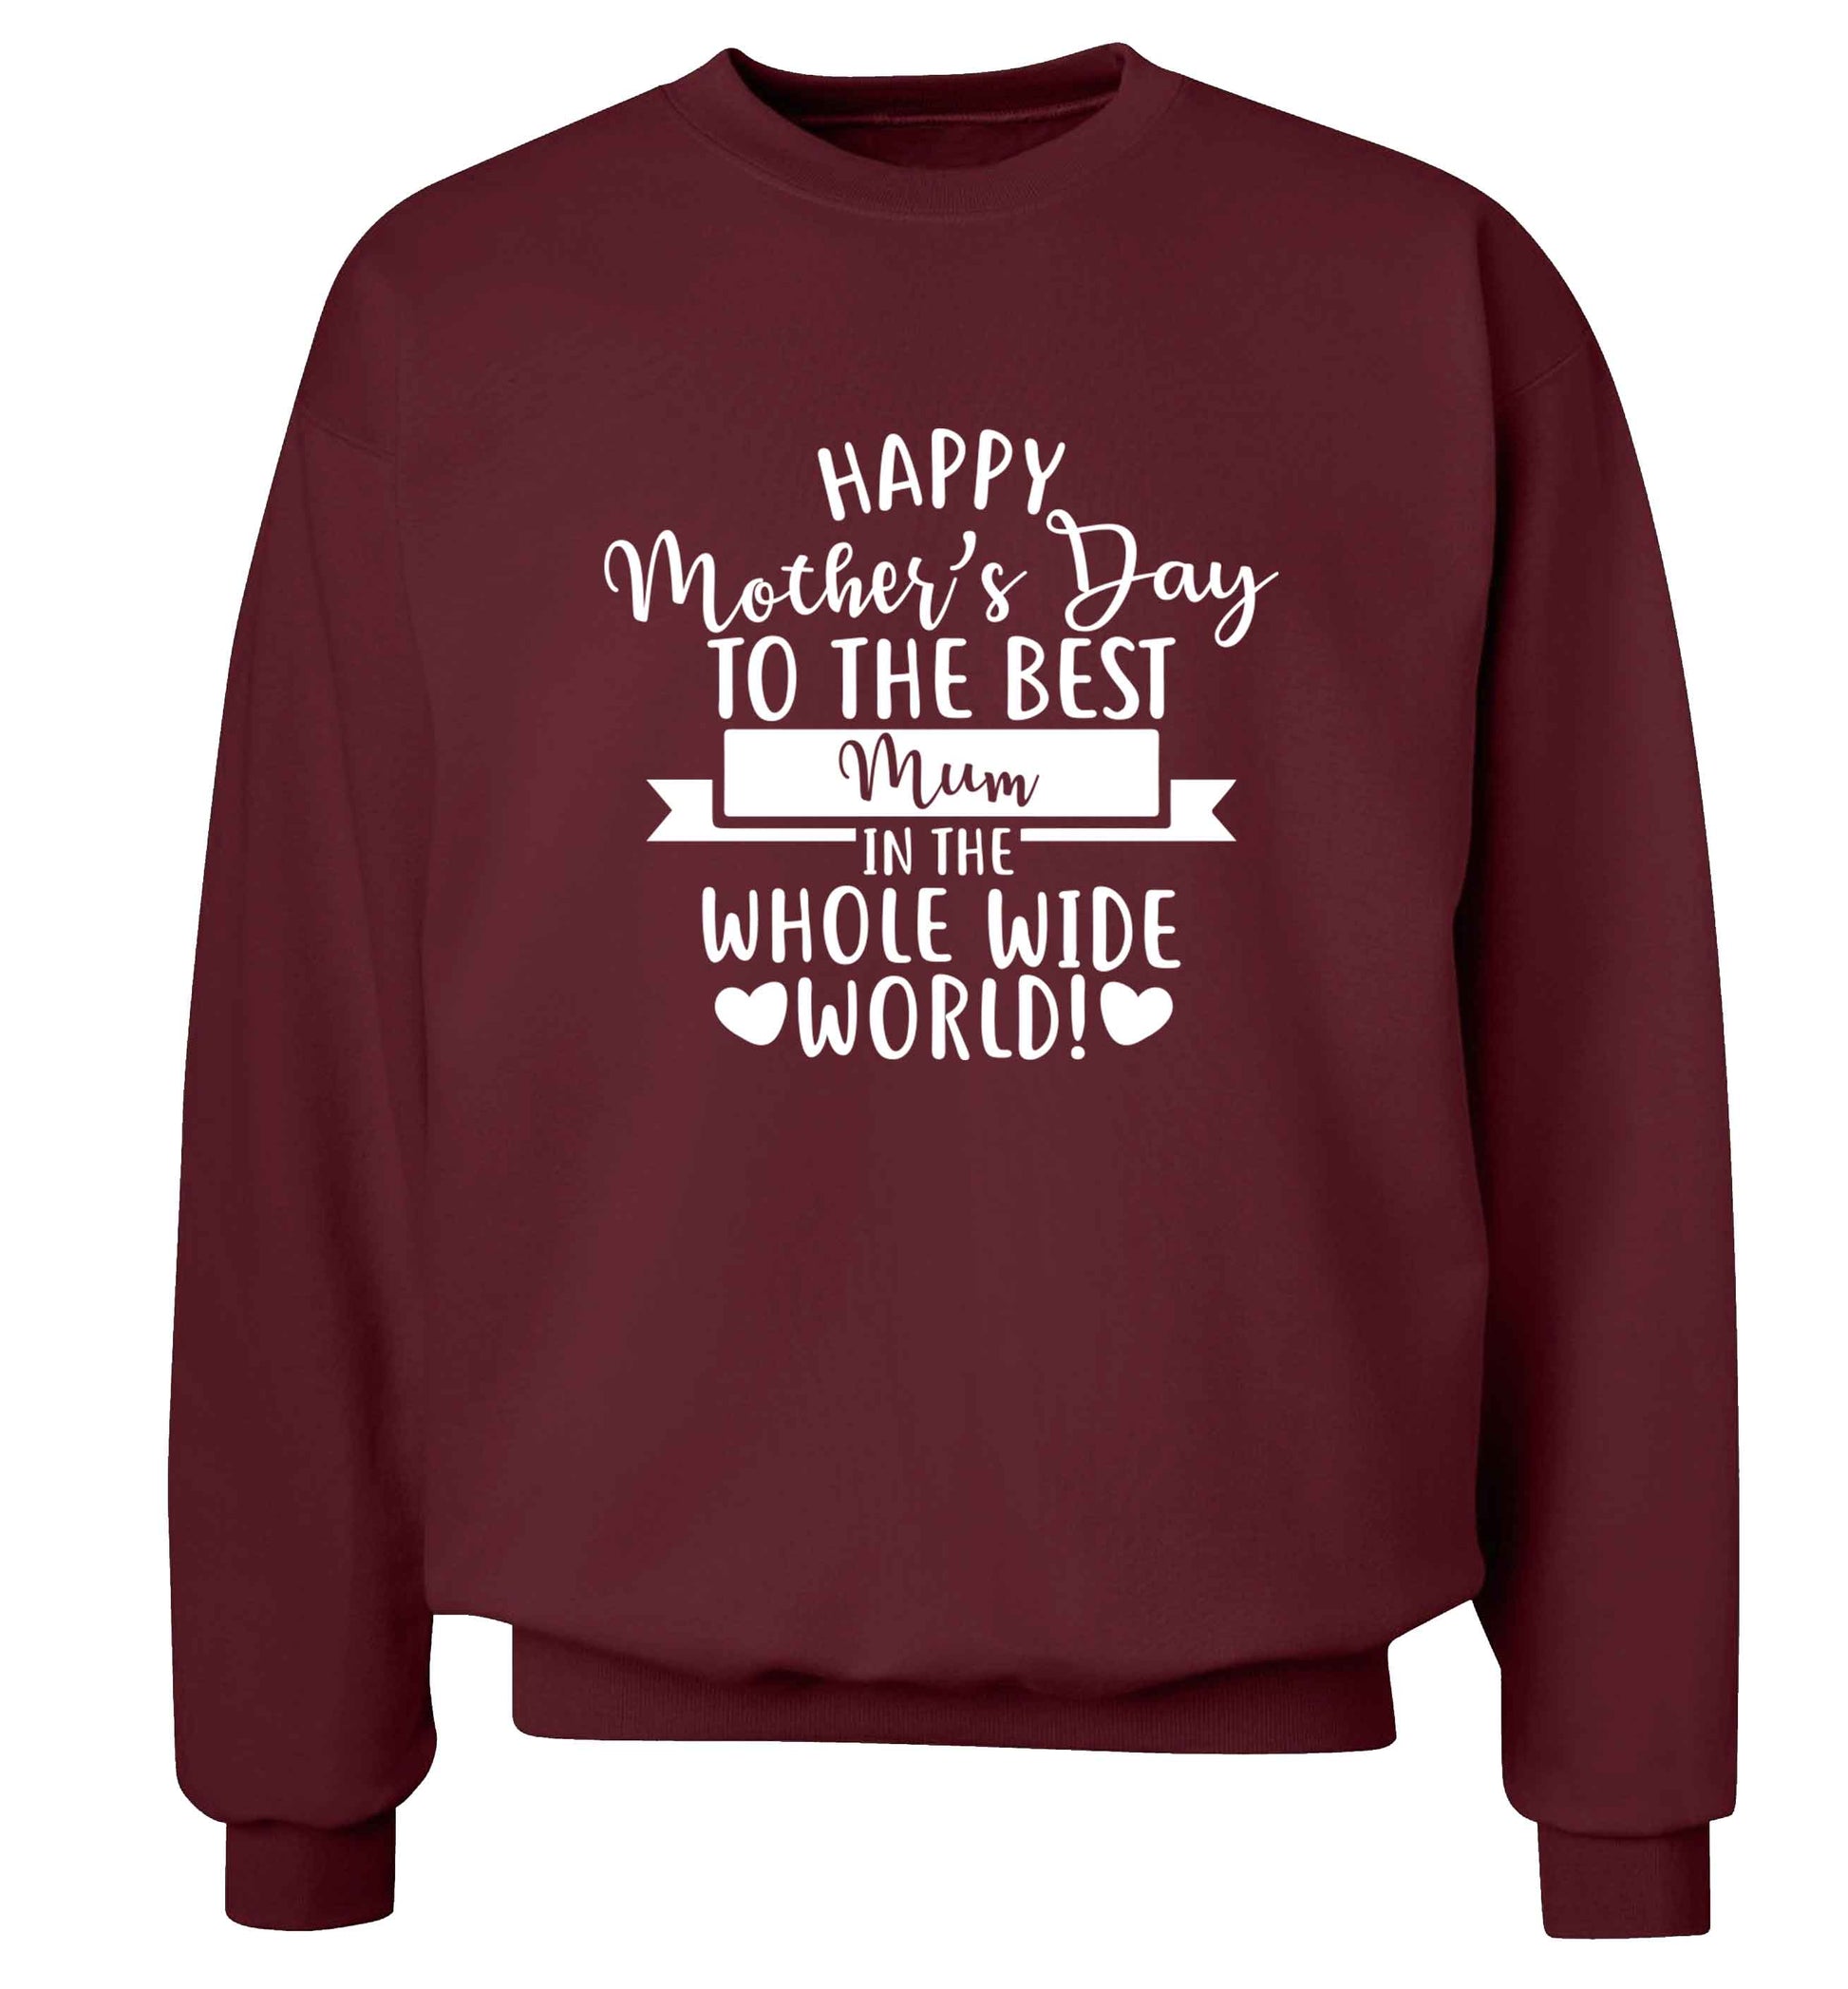 Happy mother's day to the best mum in the world adult's unisex maroon sweater 2XL